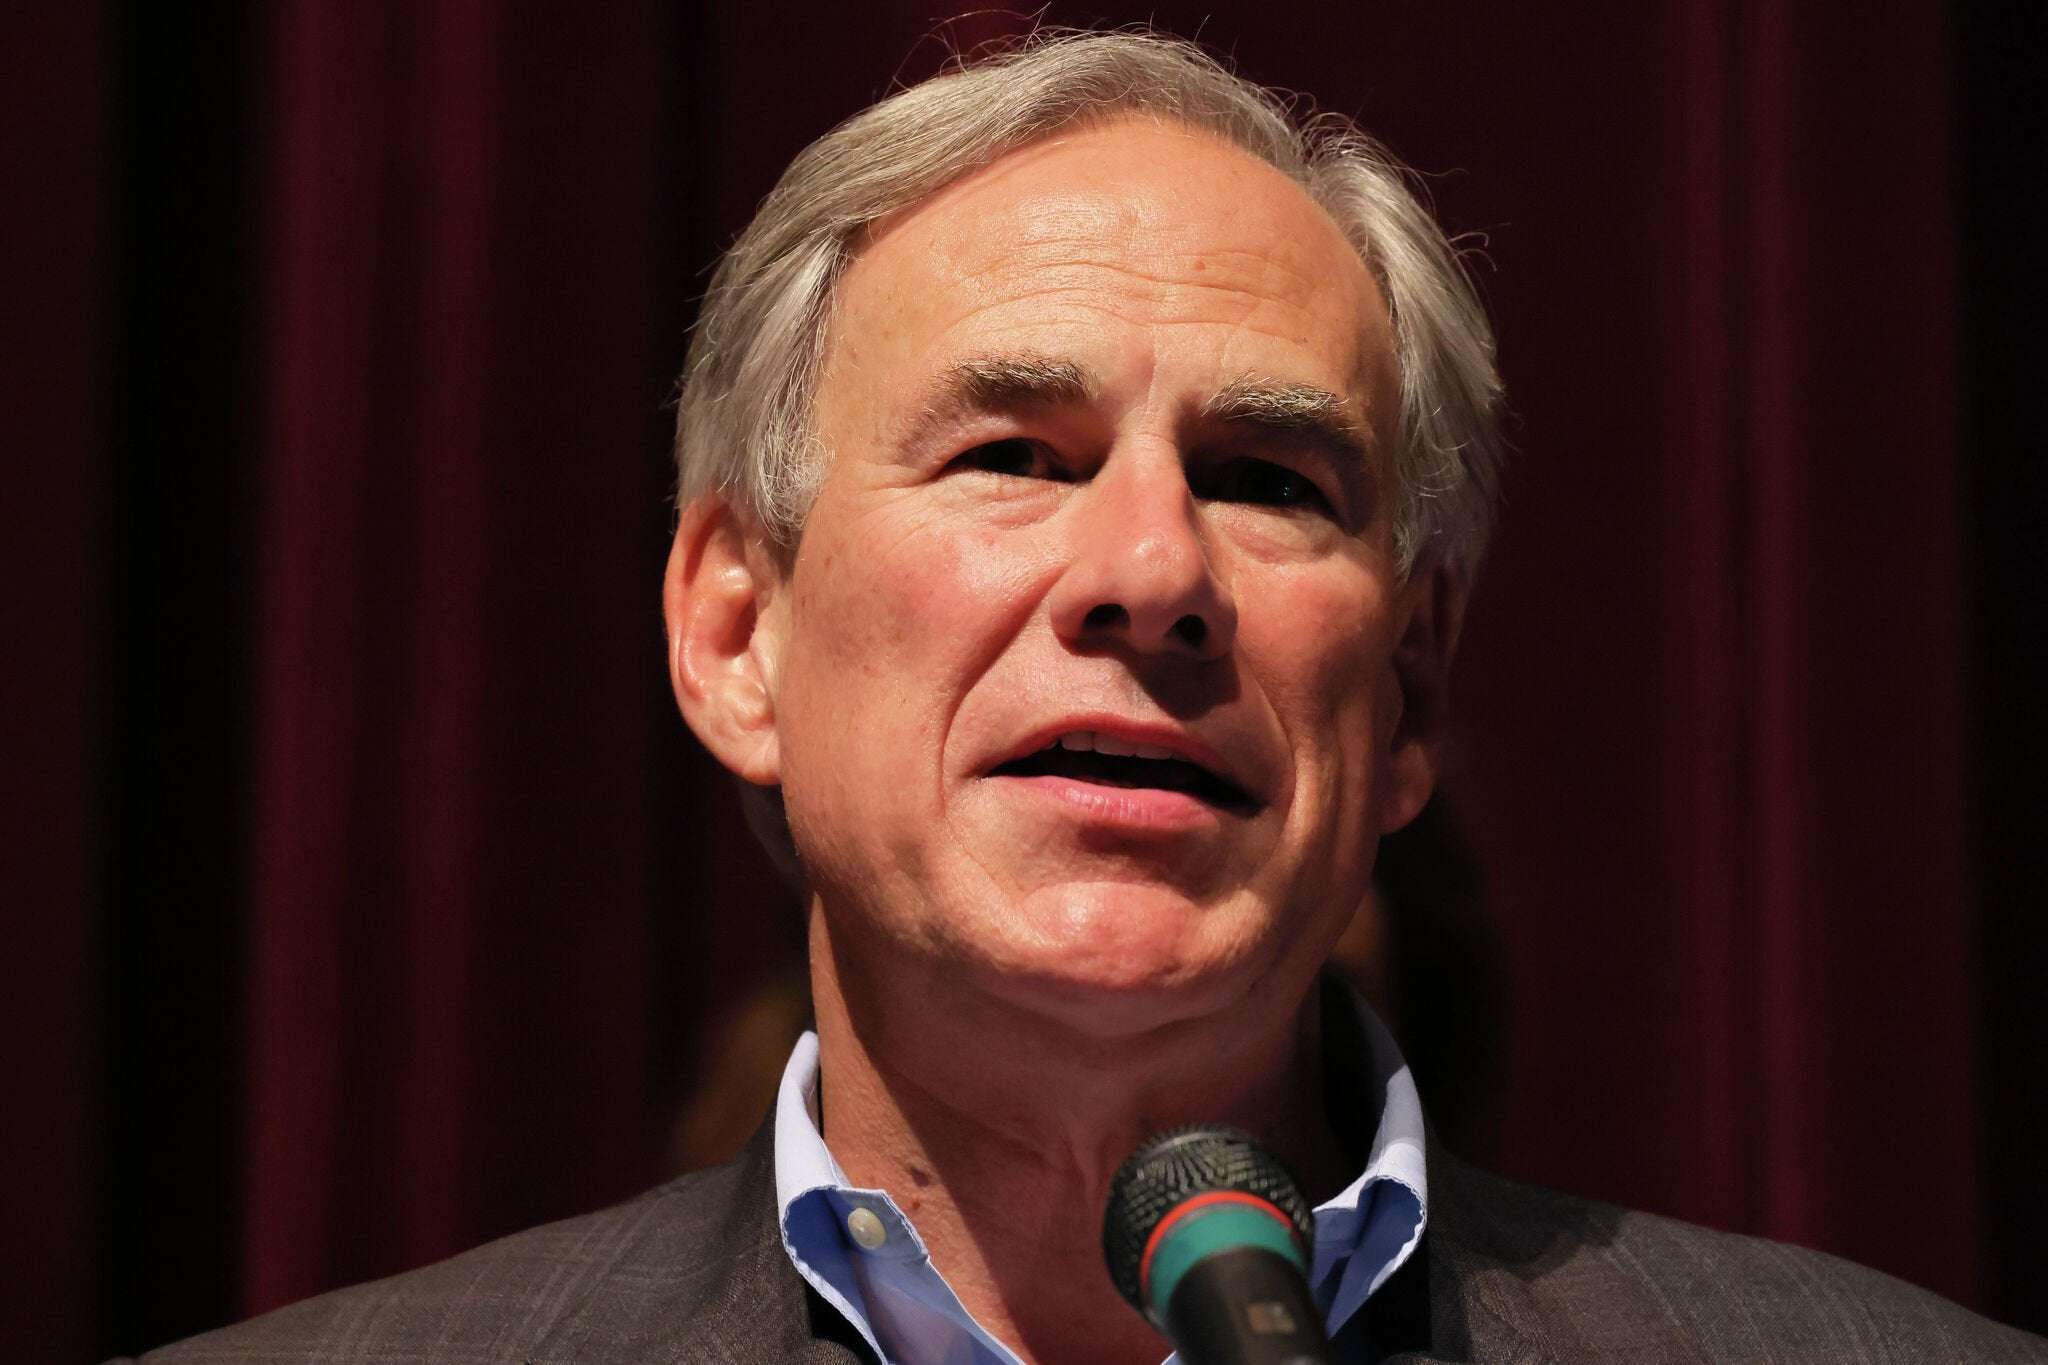 image for Gov. Greg Abbott did not attend funerals for any of the Uvalde shooting victims